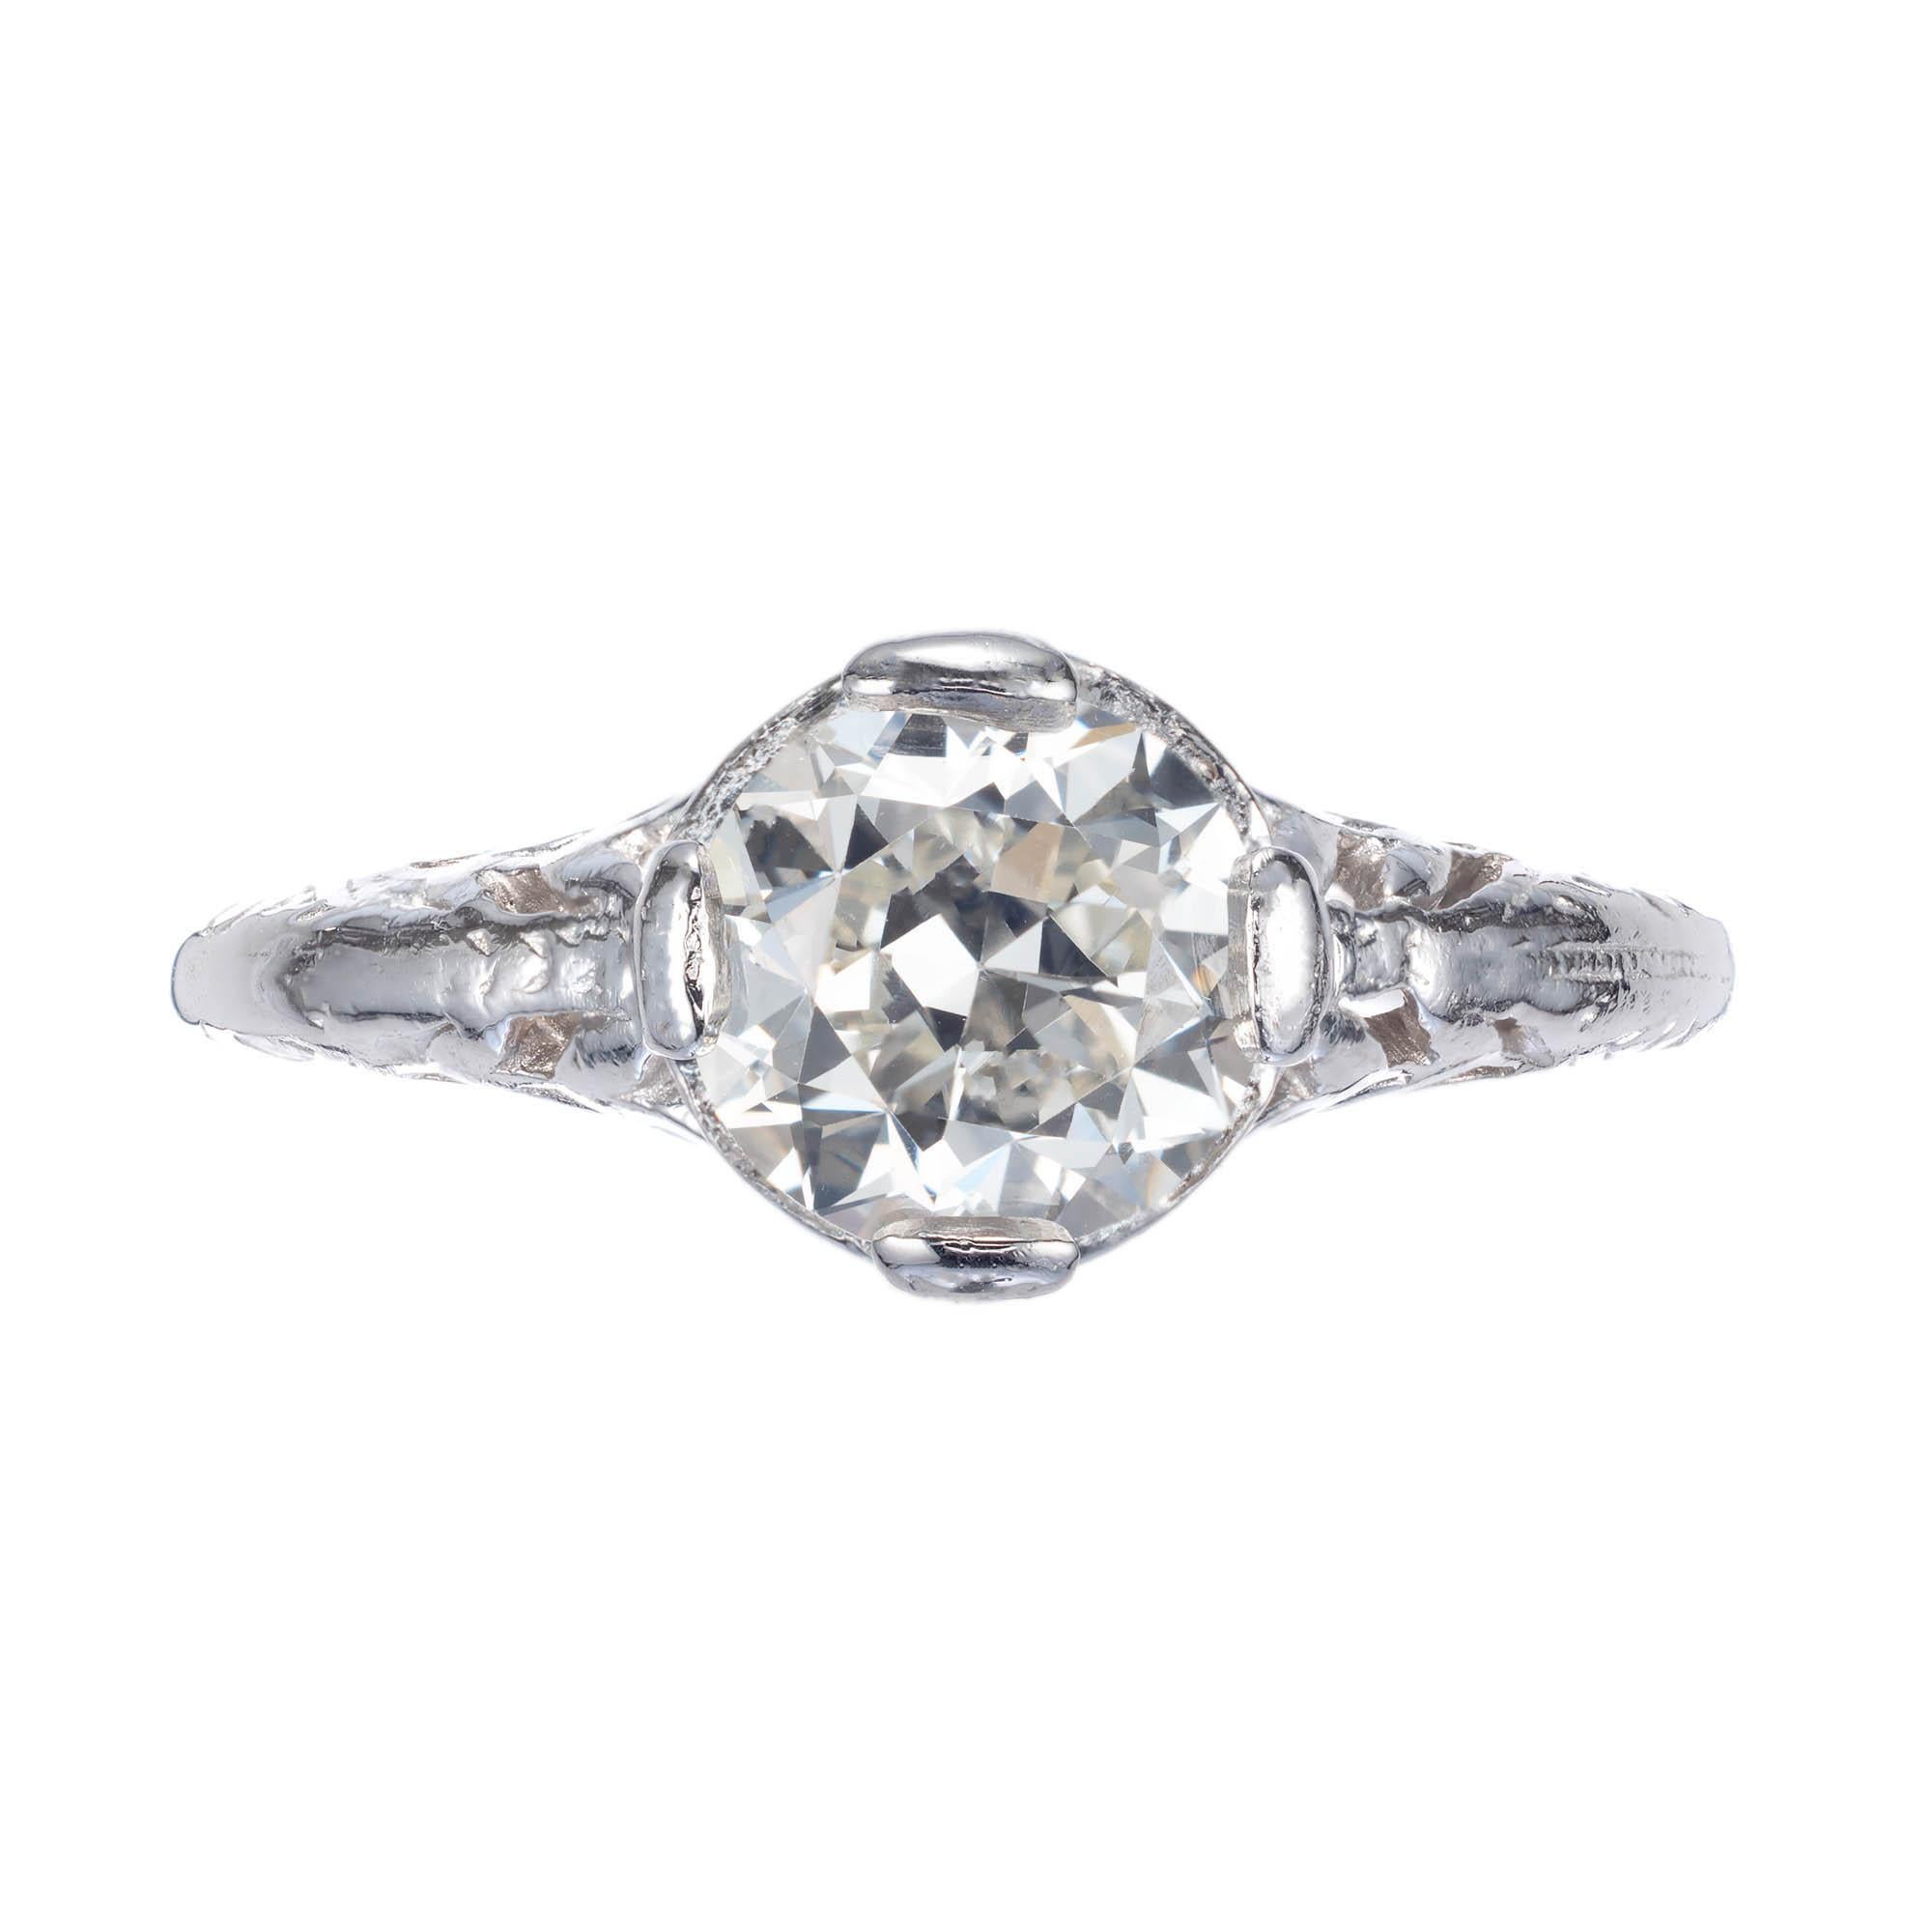 1940's diamond engagement ring. Round brilliant cut center stone set in its original filigree platinum setting. 

1 round brilliant cut I-J SI diamond, Approximate 1.10 carats. EGL Certificate # US400115798D
Size 5 and sizable 
Platinum 
Tested: